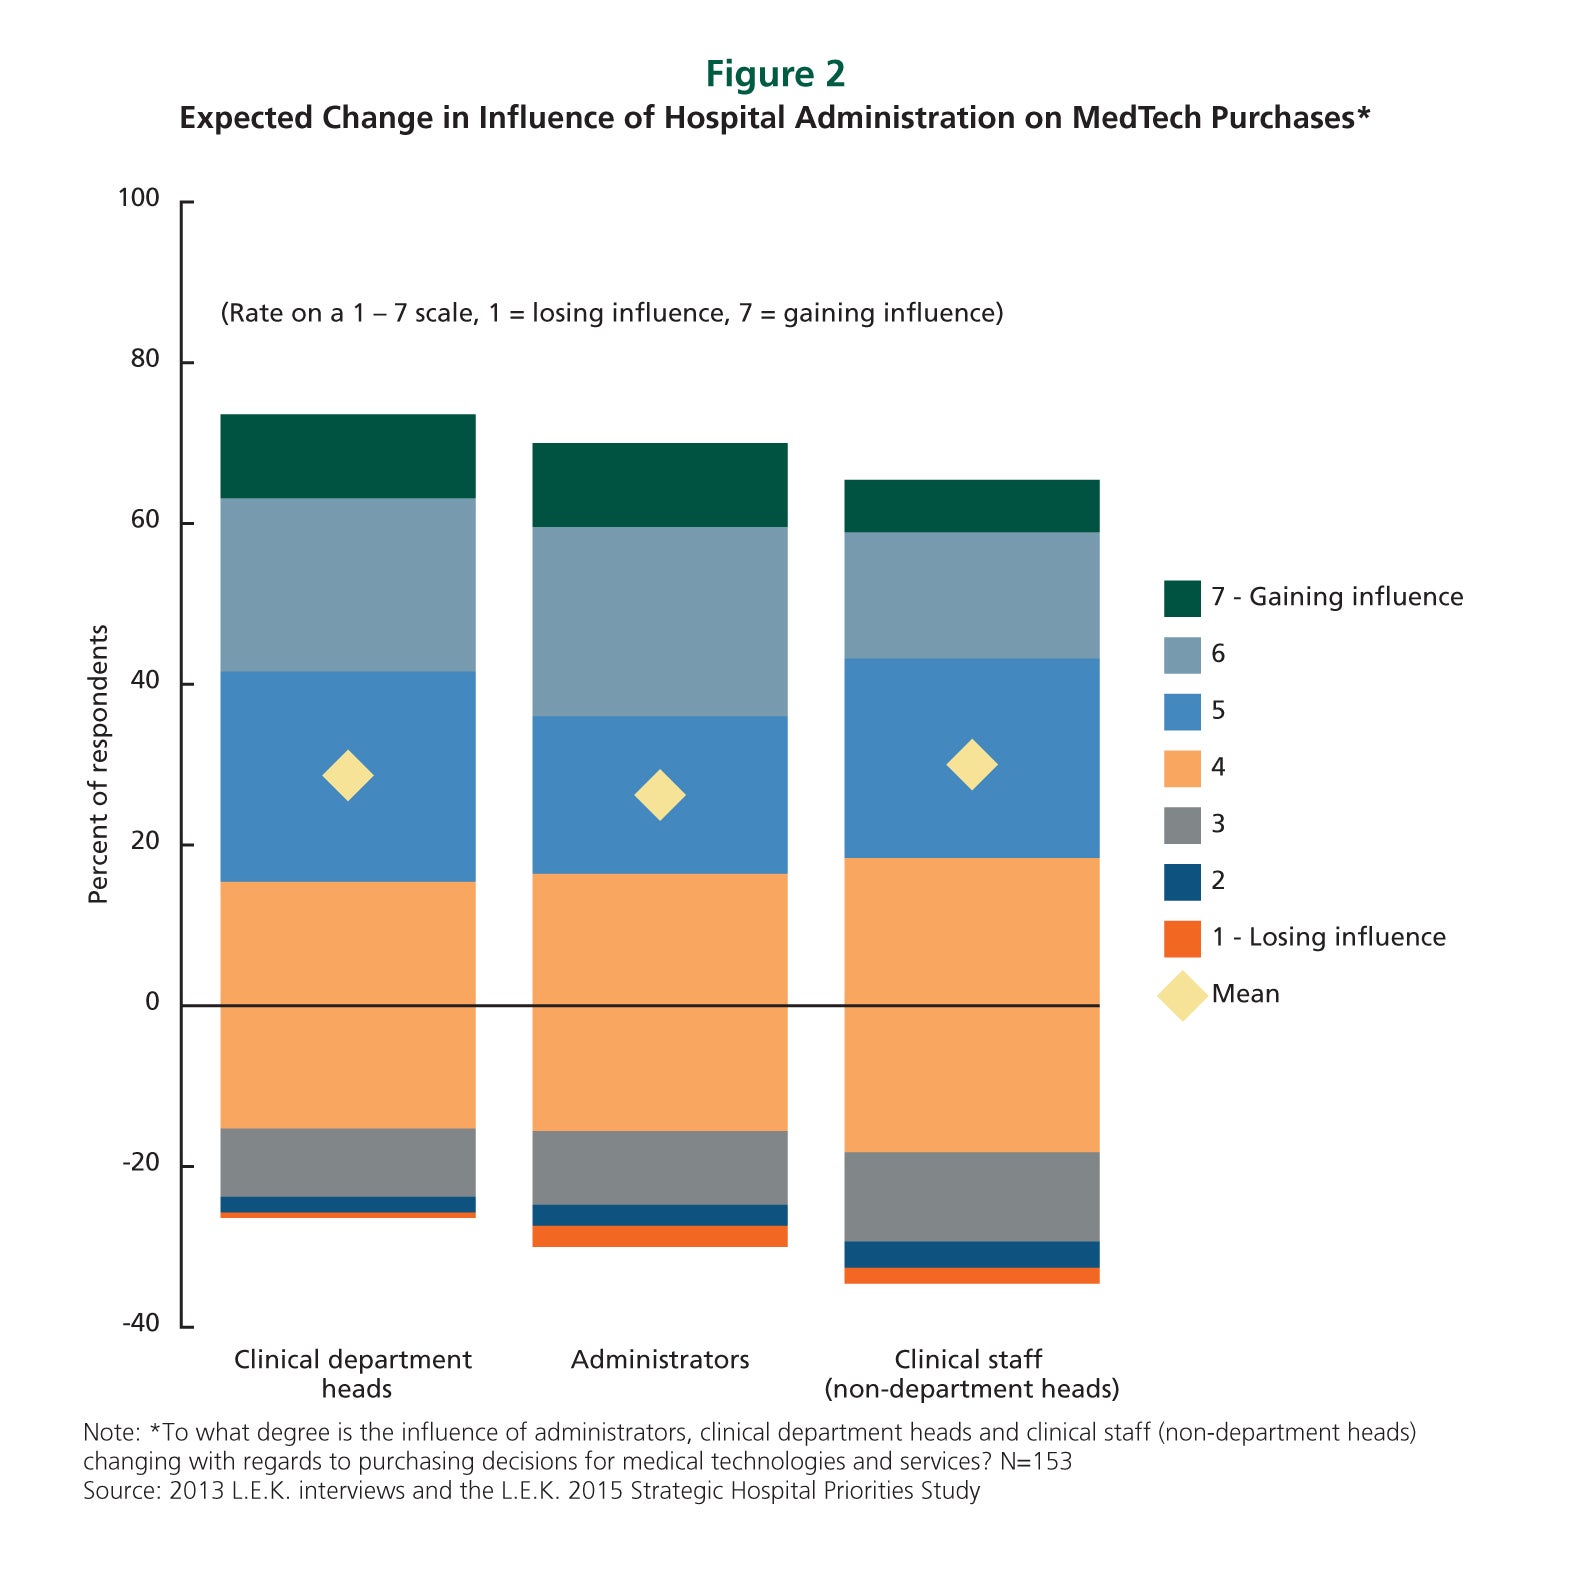 Expected Change in Influence of Hospital Administration on MedTech Purchases